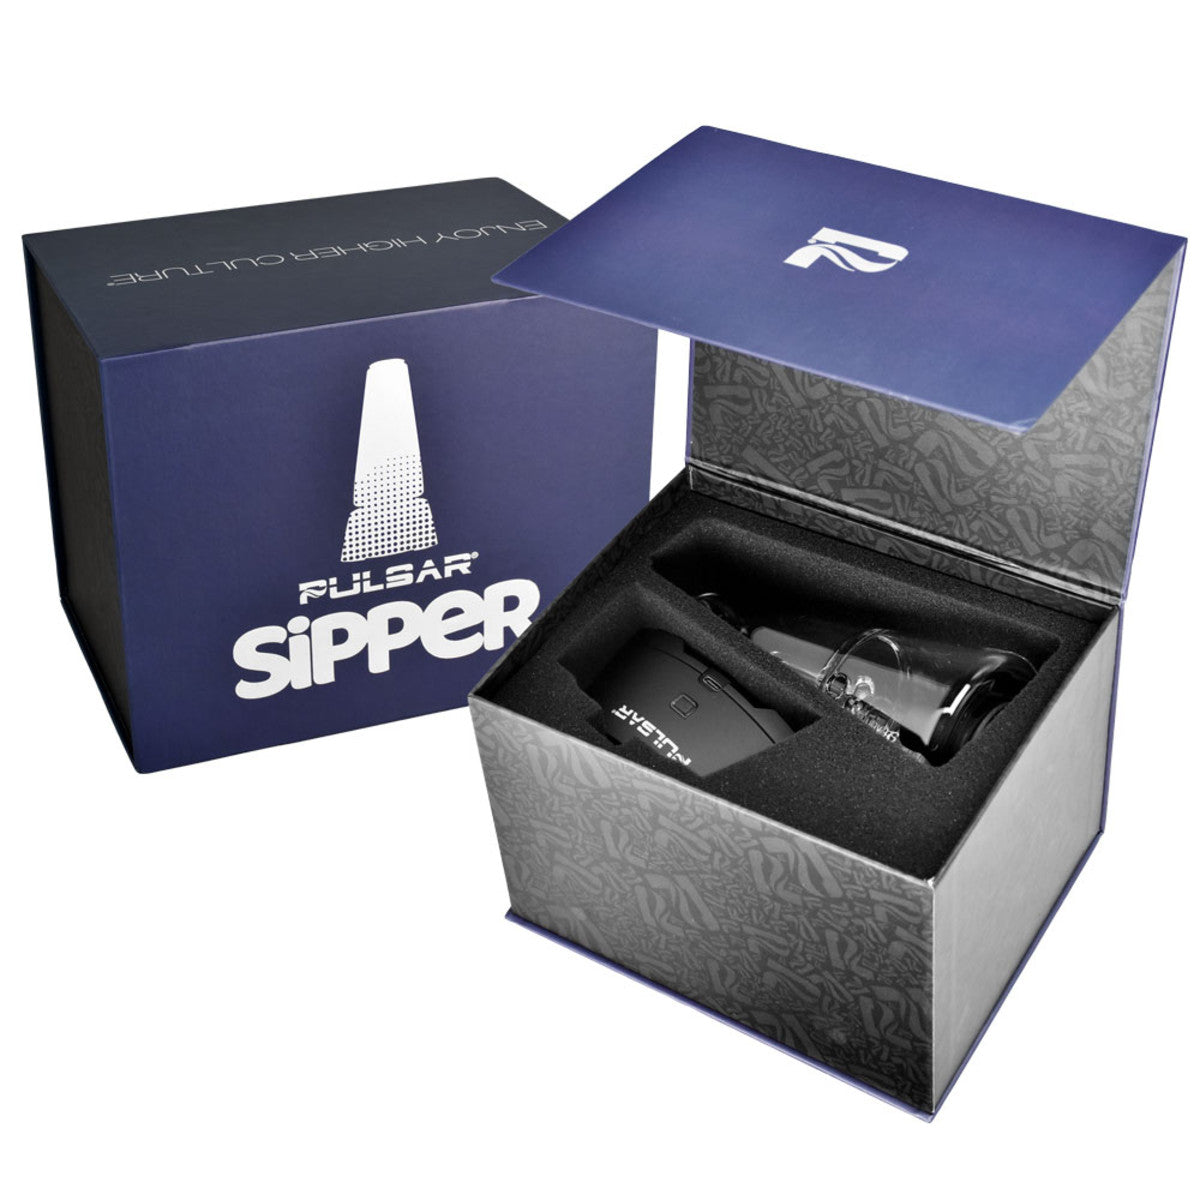 pulsar sipper concentrate vaporizer electronic dab rig box